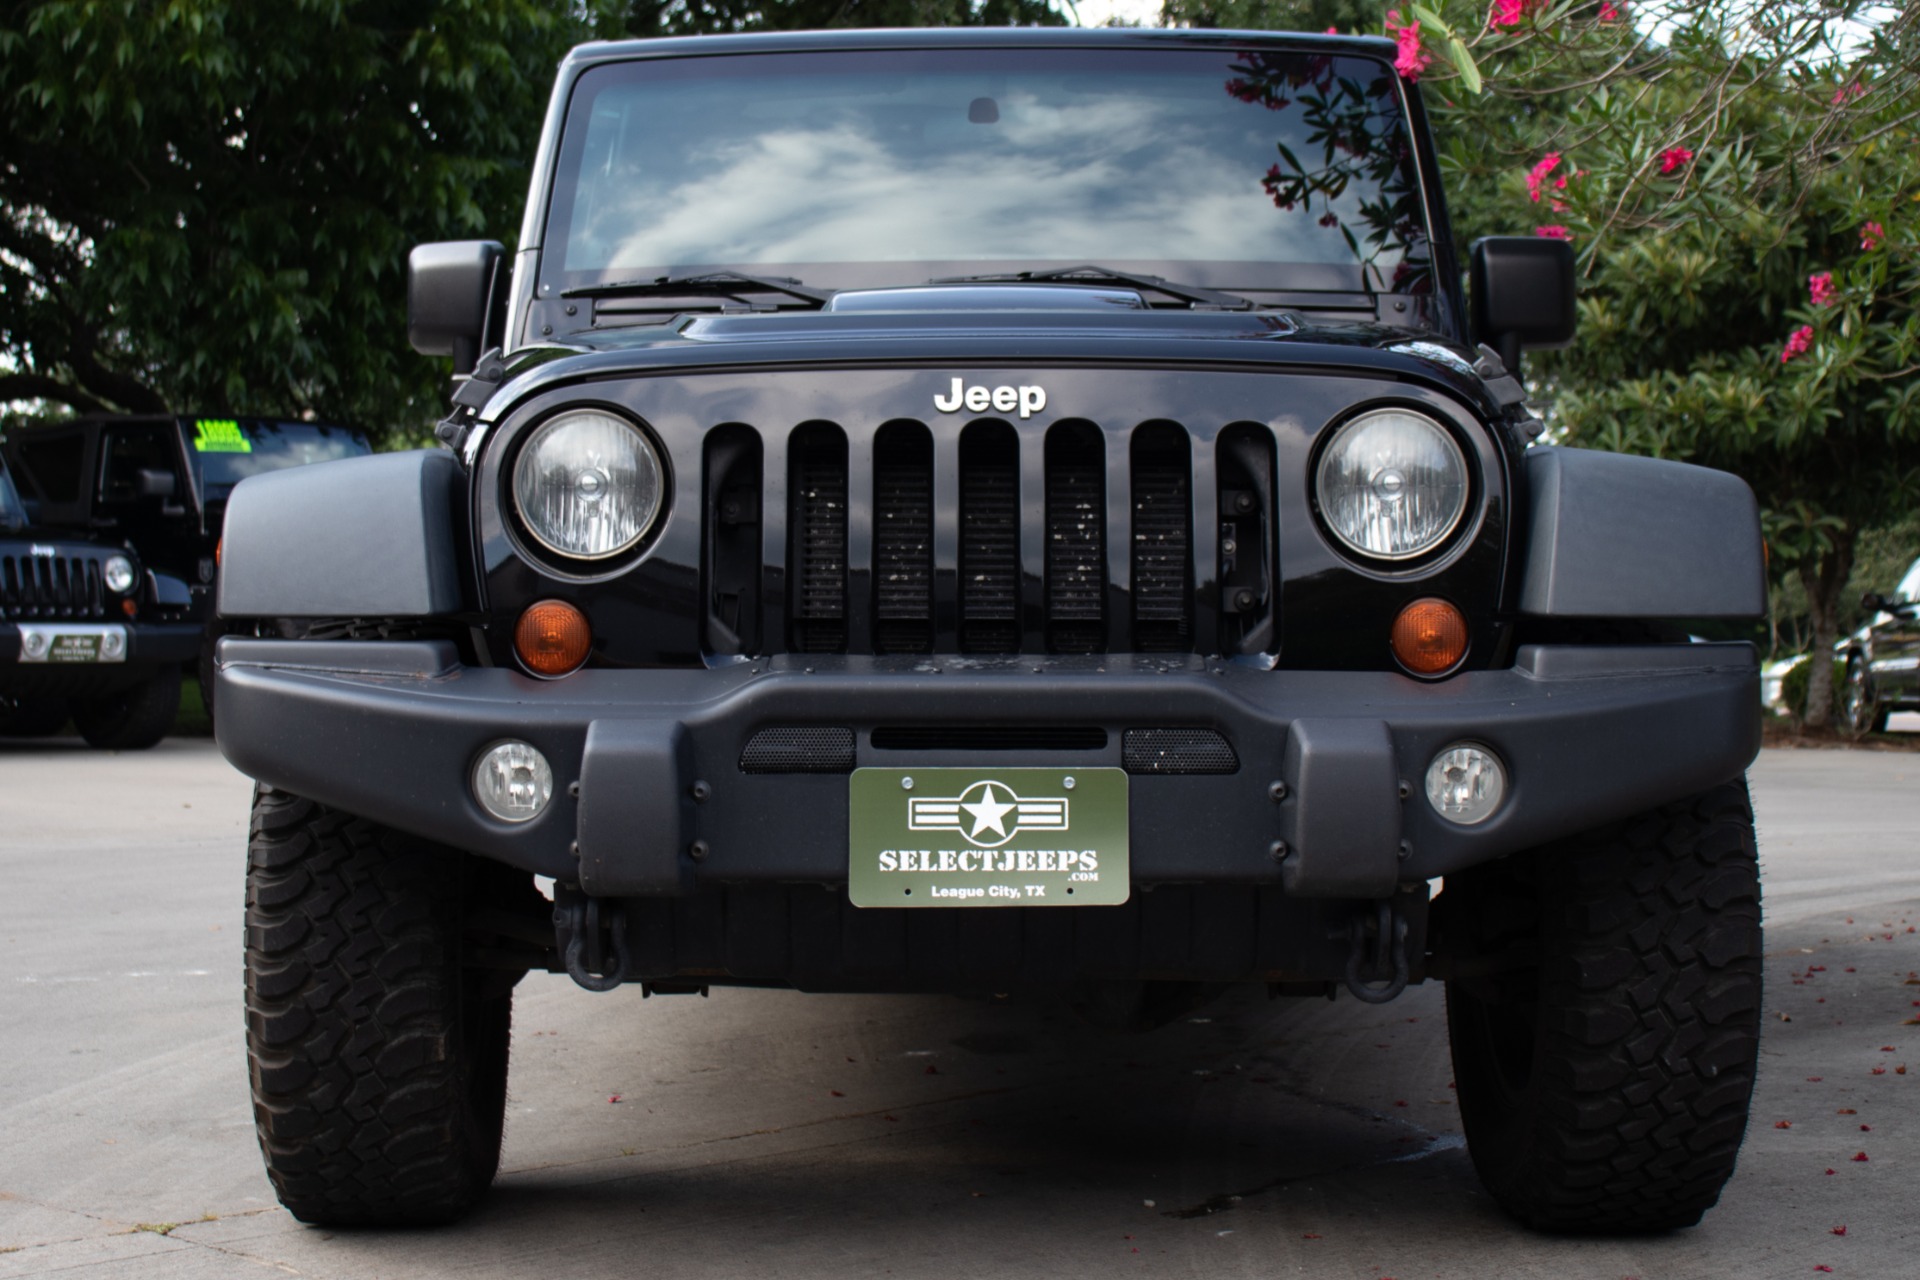 Used-2012-Jeep-Wrangler-Unlimited-Call-of-Duty-MW3.jpg